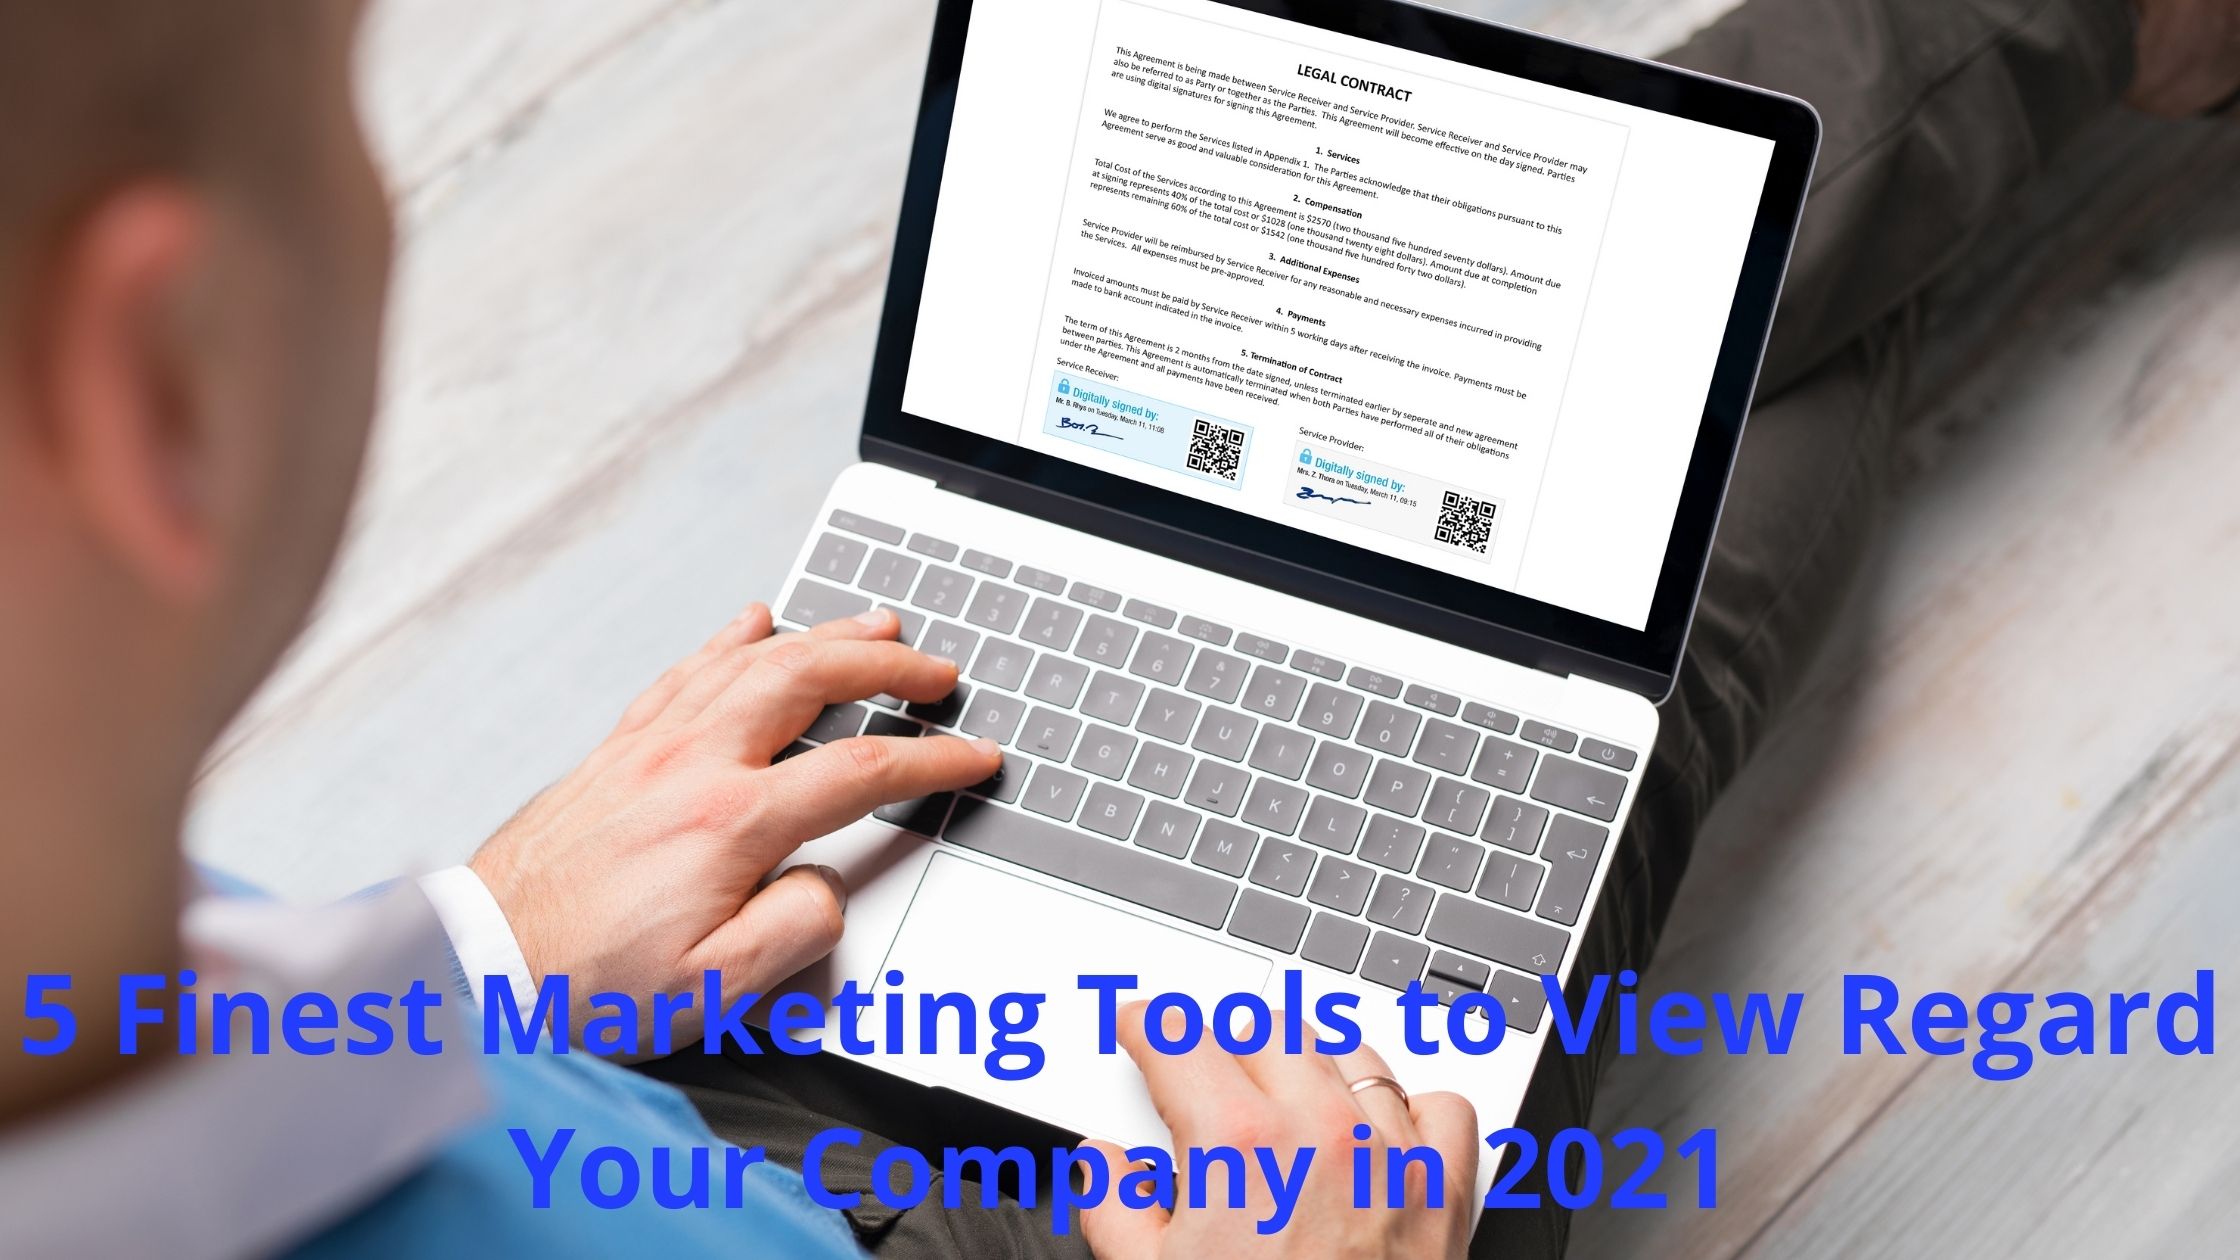 5 Finest Marketing Tools to View Regard Your Company in 2021